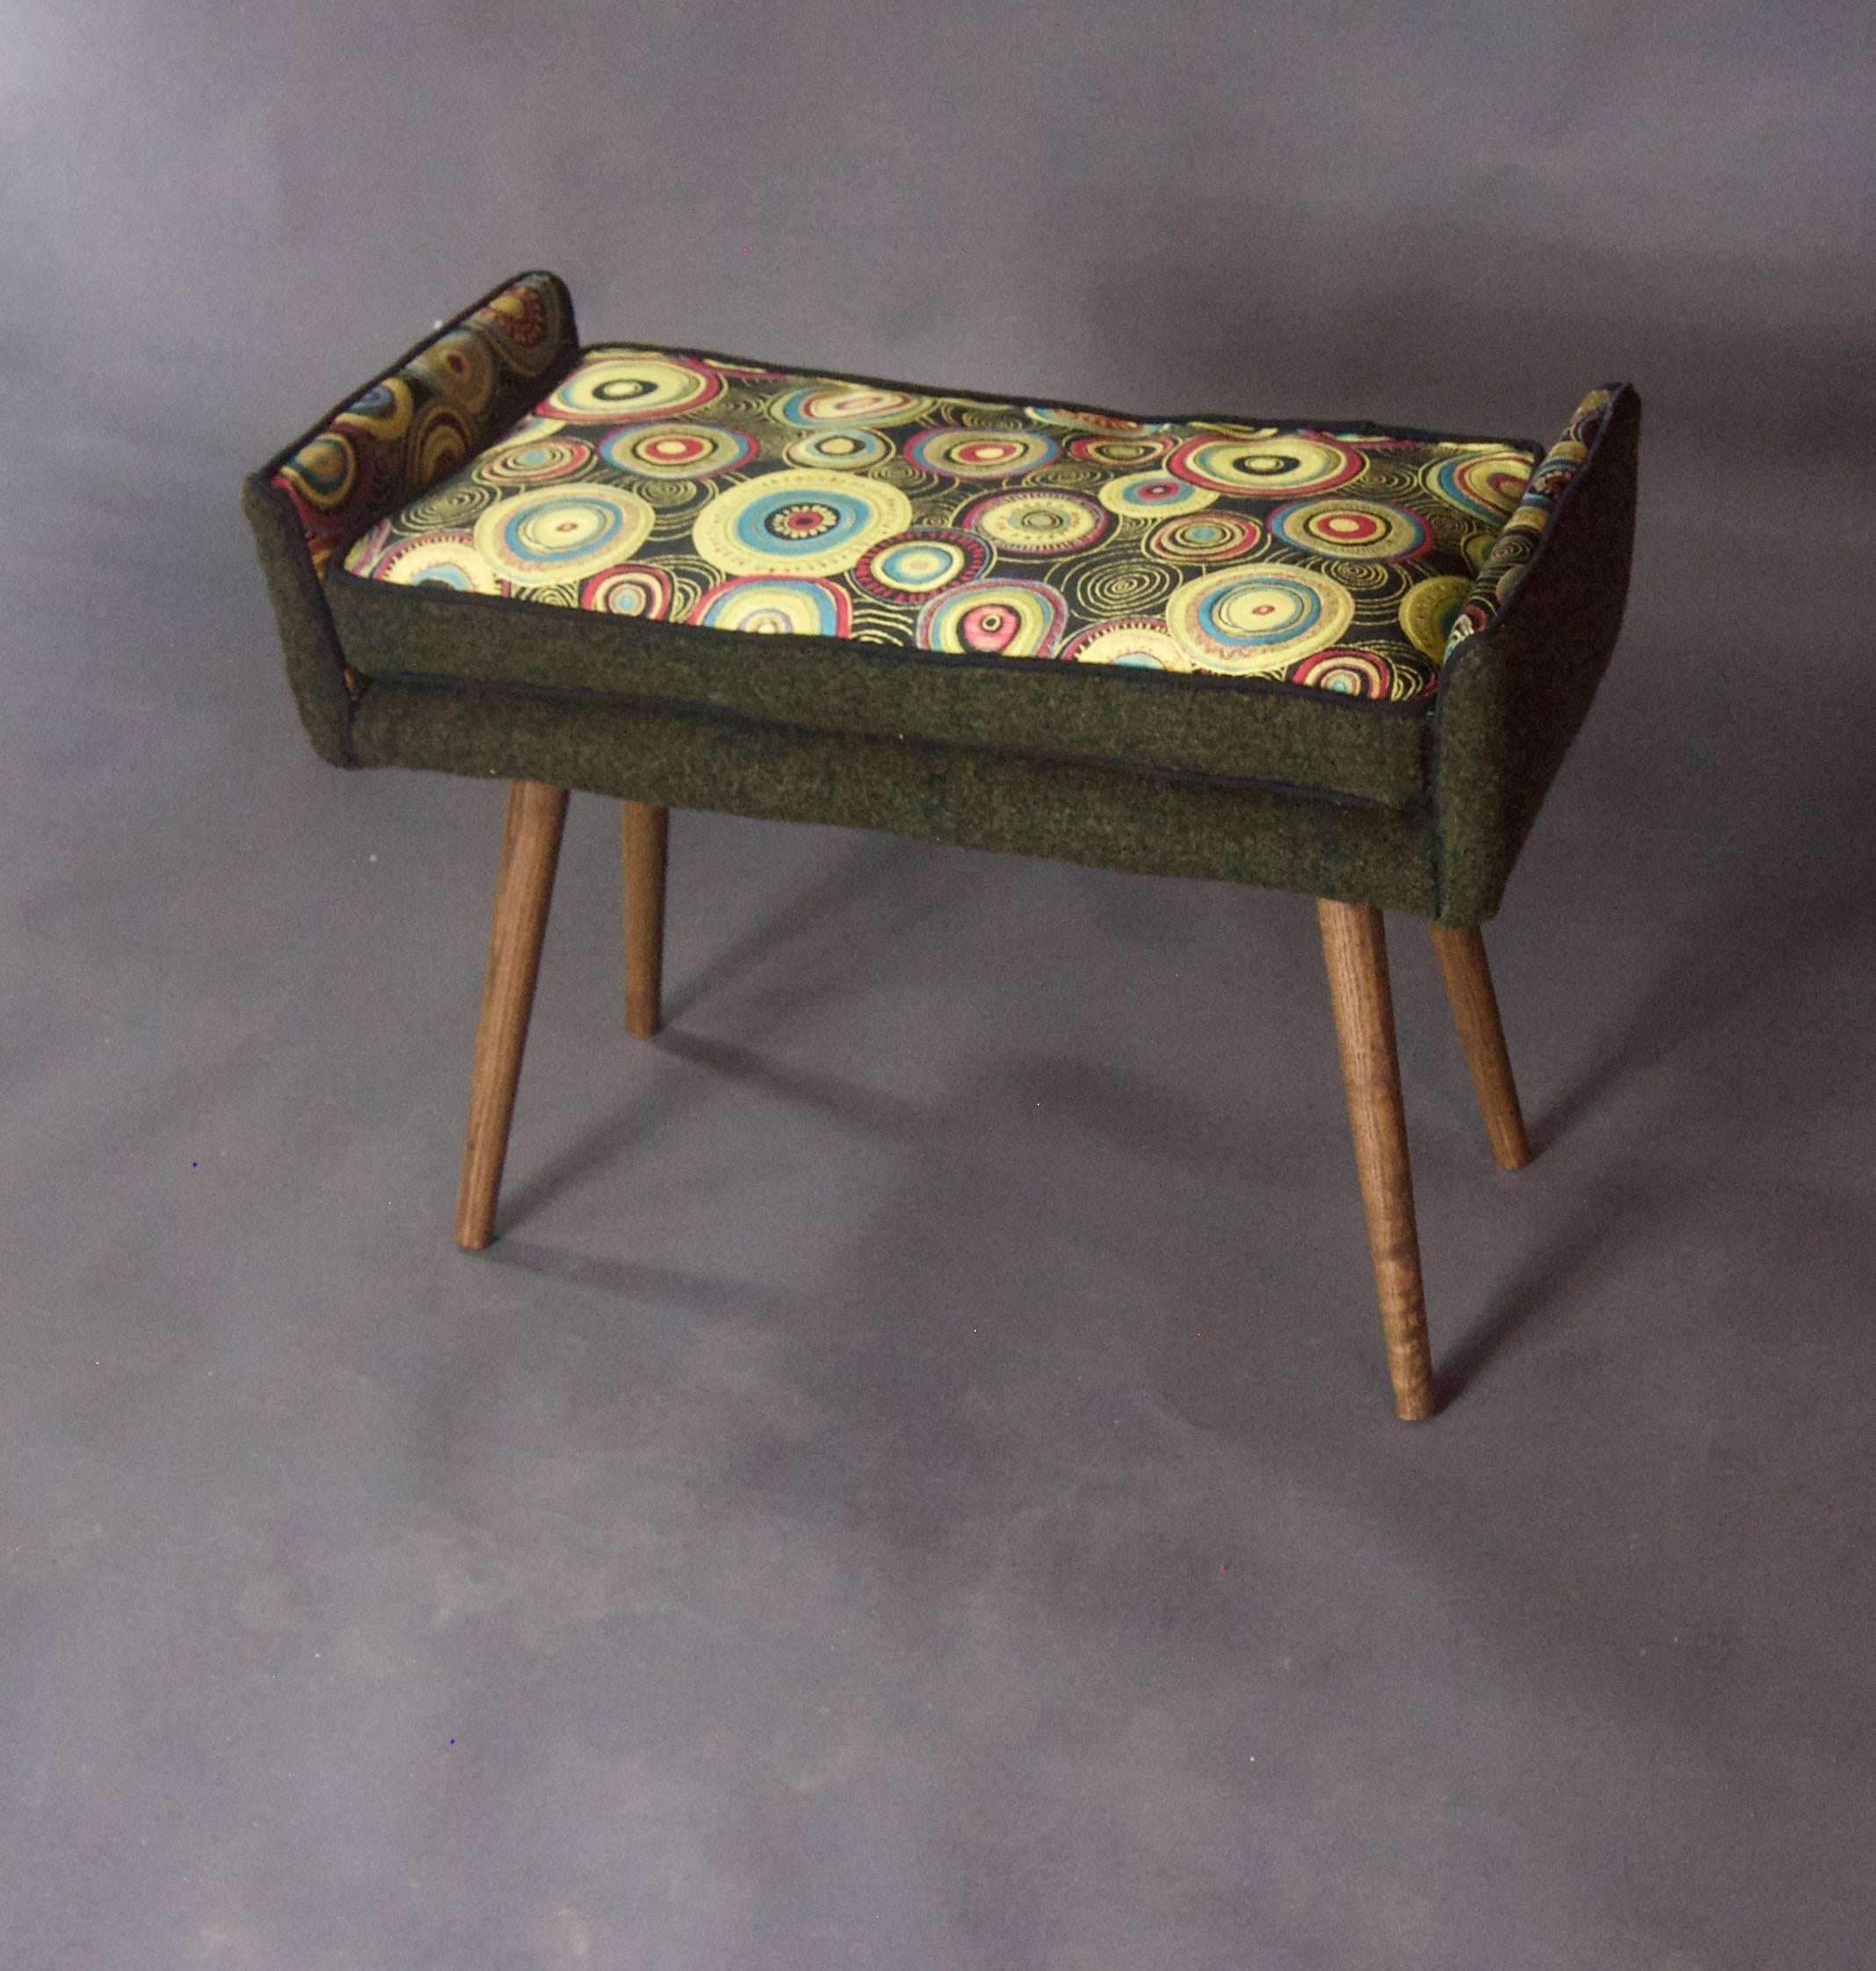 This vanity-sized stool will add a dash of color and personality (not to mention an additional seat) to any room. Picture it under a window, in a corner, at the end of a hall.

This stool is leggy and is dressed in a sunburst pattern with a forest